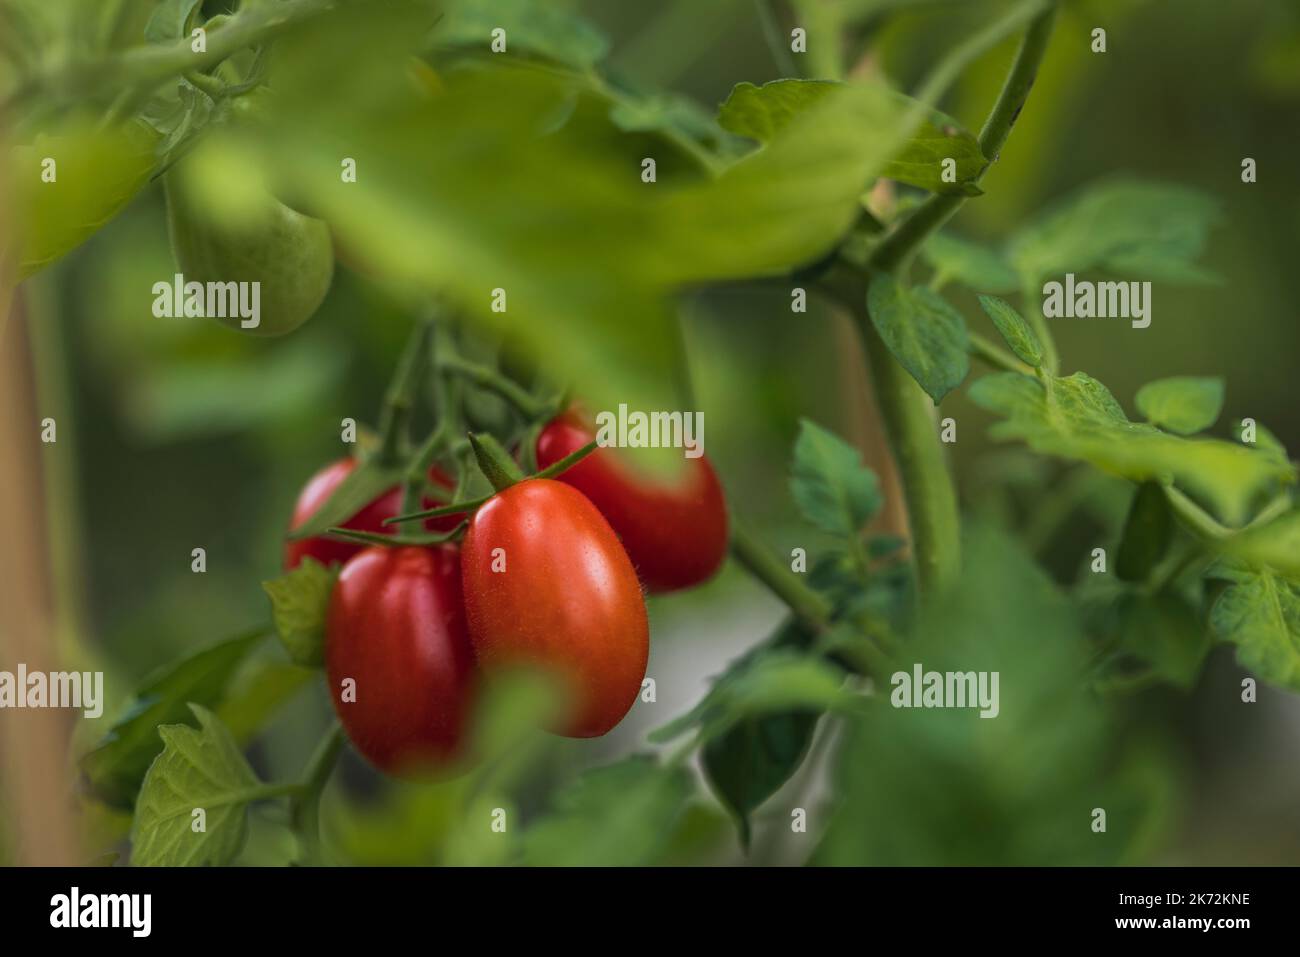 Close-up of tomatoes on branch Stock Photo